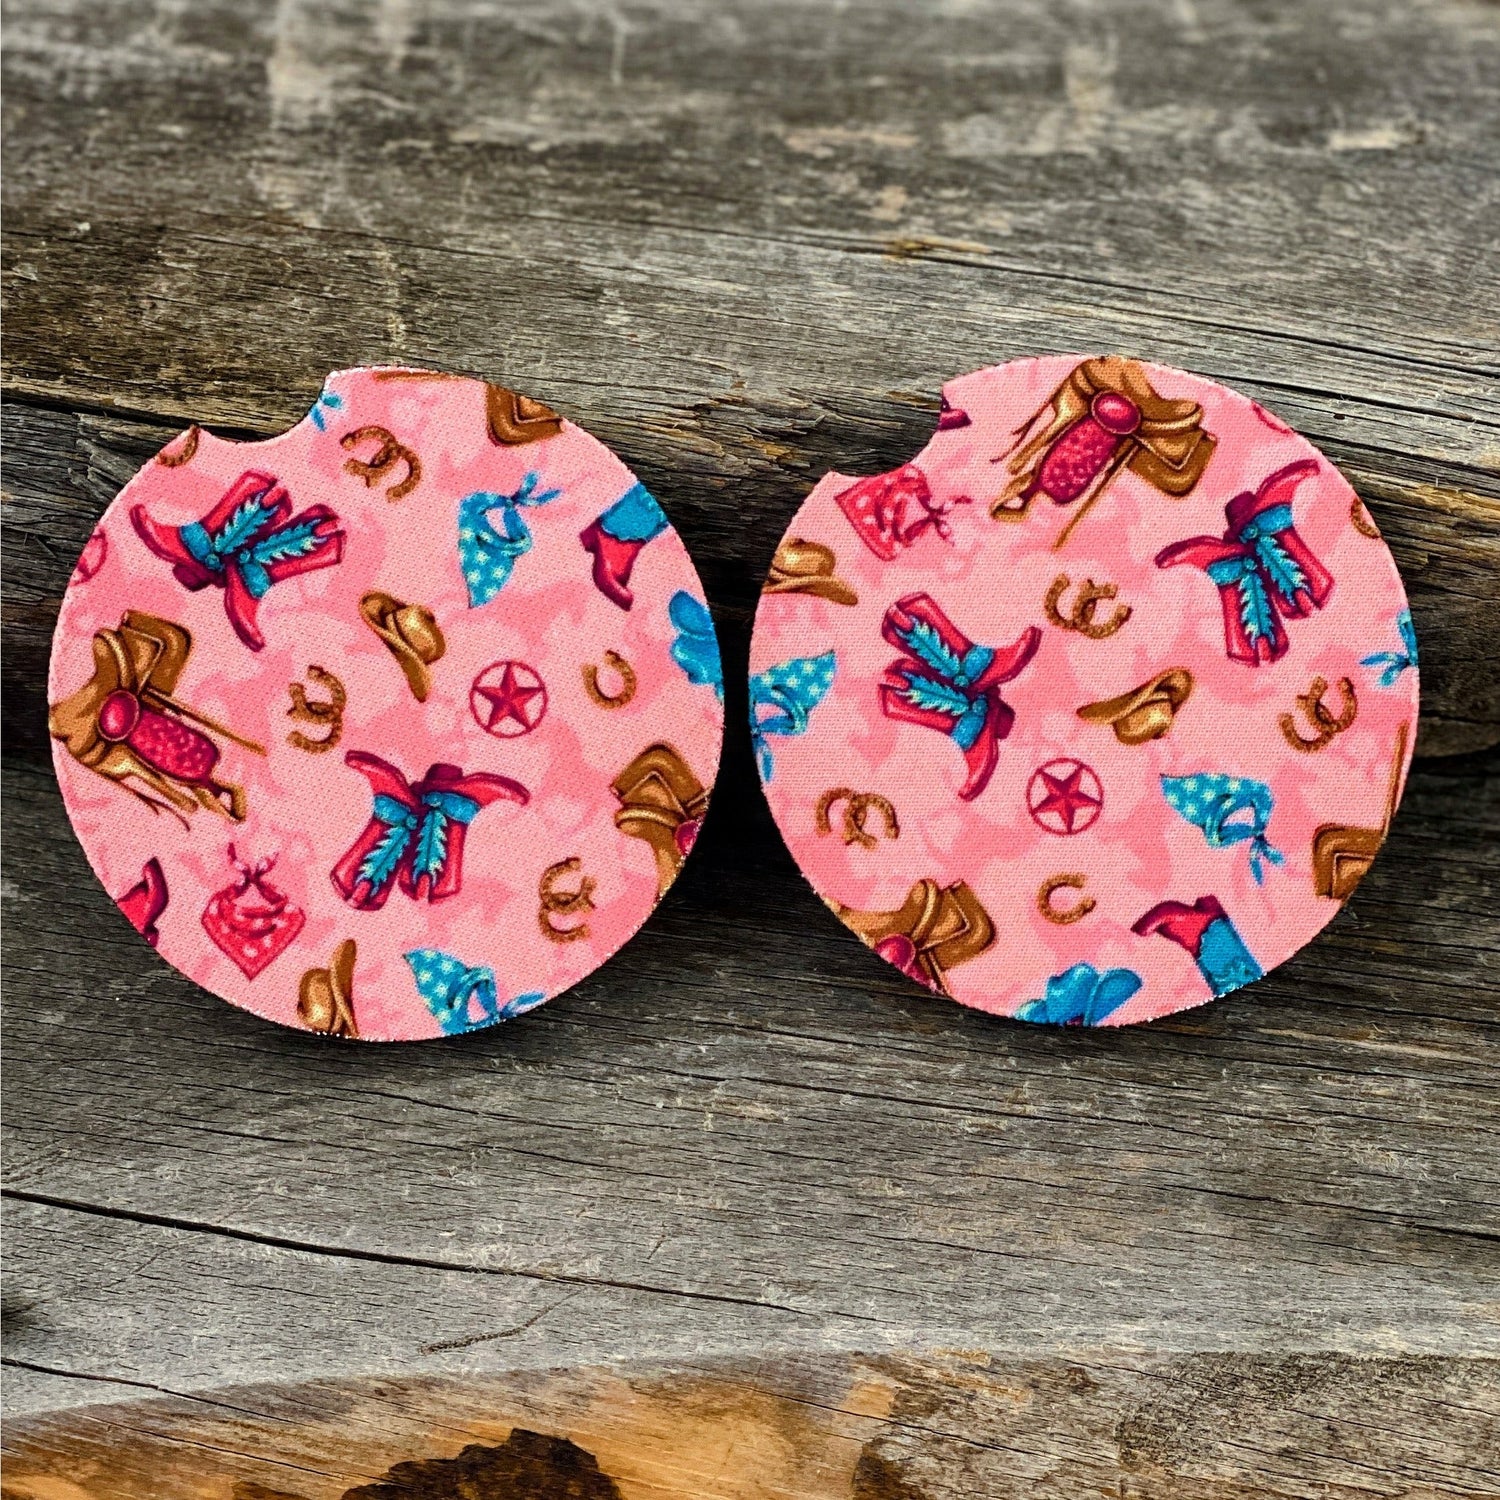 Cleaning is a breeze with our car coasters. When they encounter stains or spills, simply toss them in the washer, and they'll come out looking as good as new. To maintain their quality, we recommend air drying them.